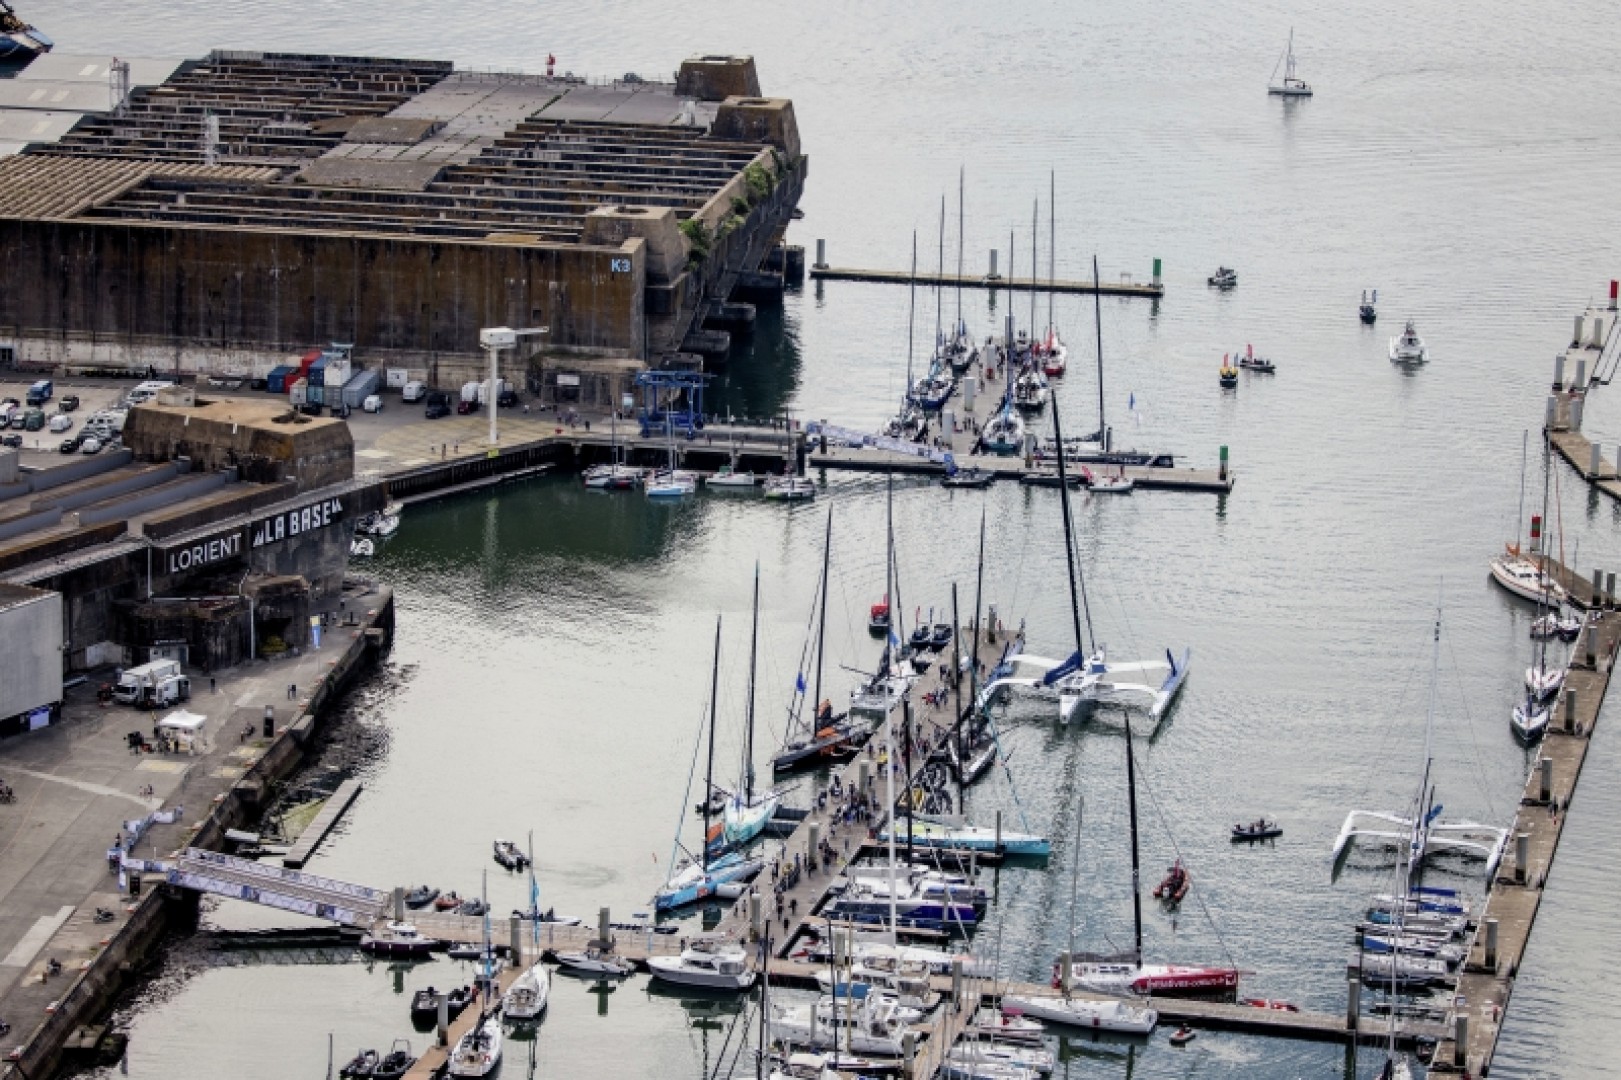 5 of The Ocean Race's Imoca teams set to race in Lorient at Défi Azimut